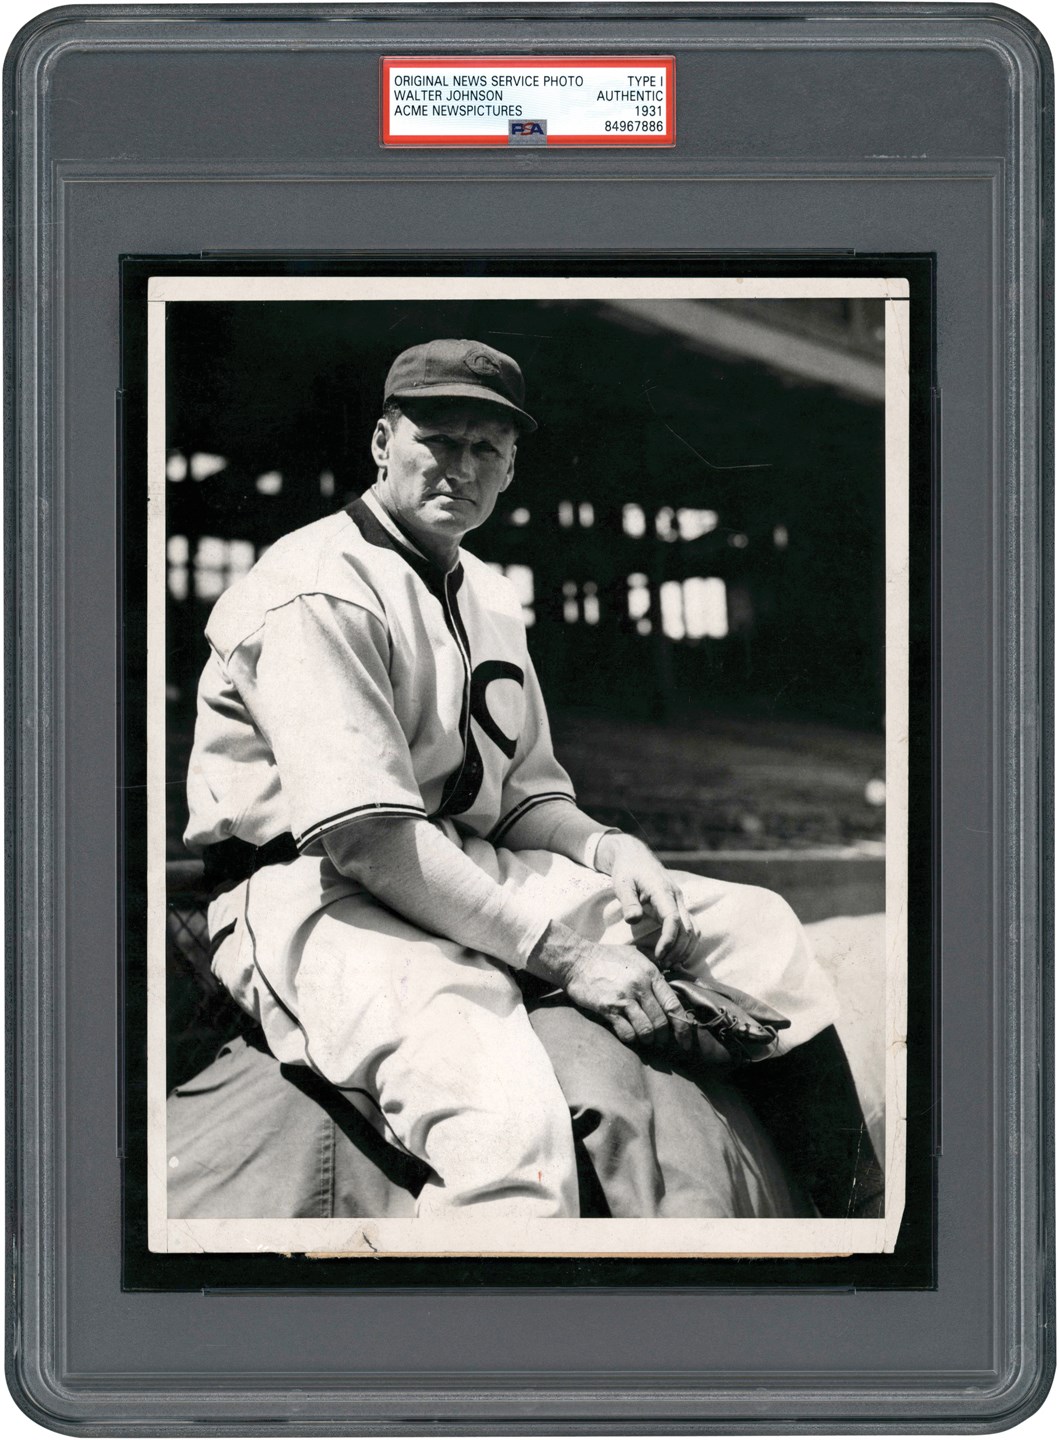 1933 Walter Johnson First Game as Cleveland Indians Manager Photograph (PSA Type I)